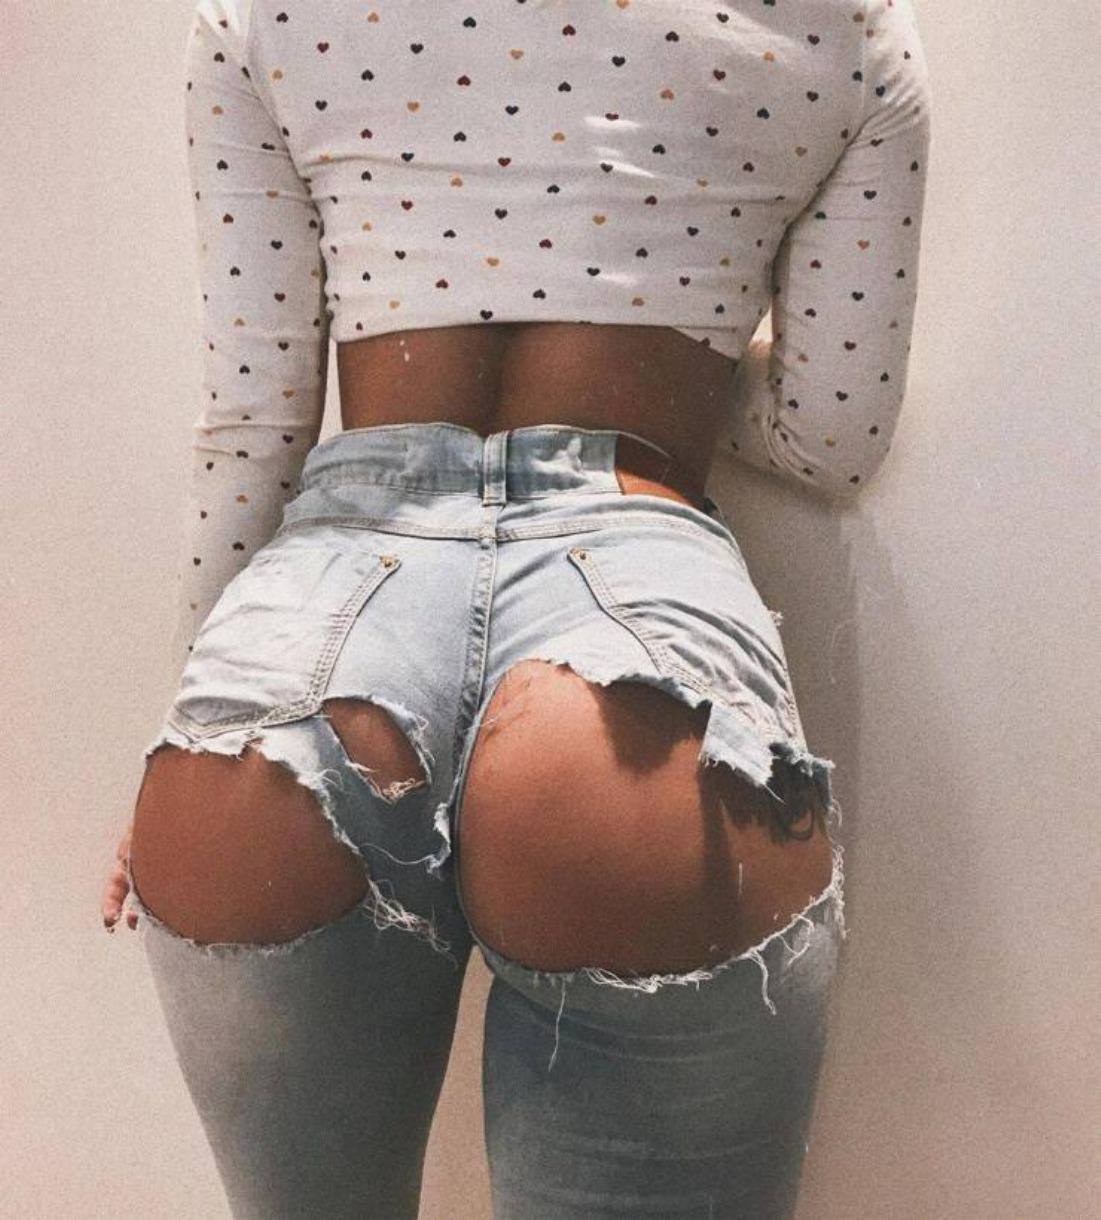 A nice pair of jeans